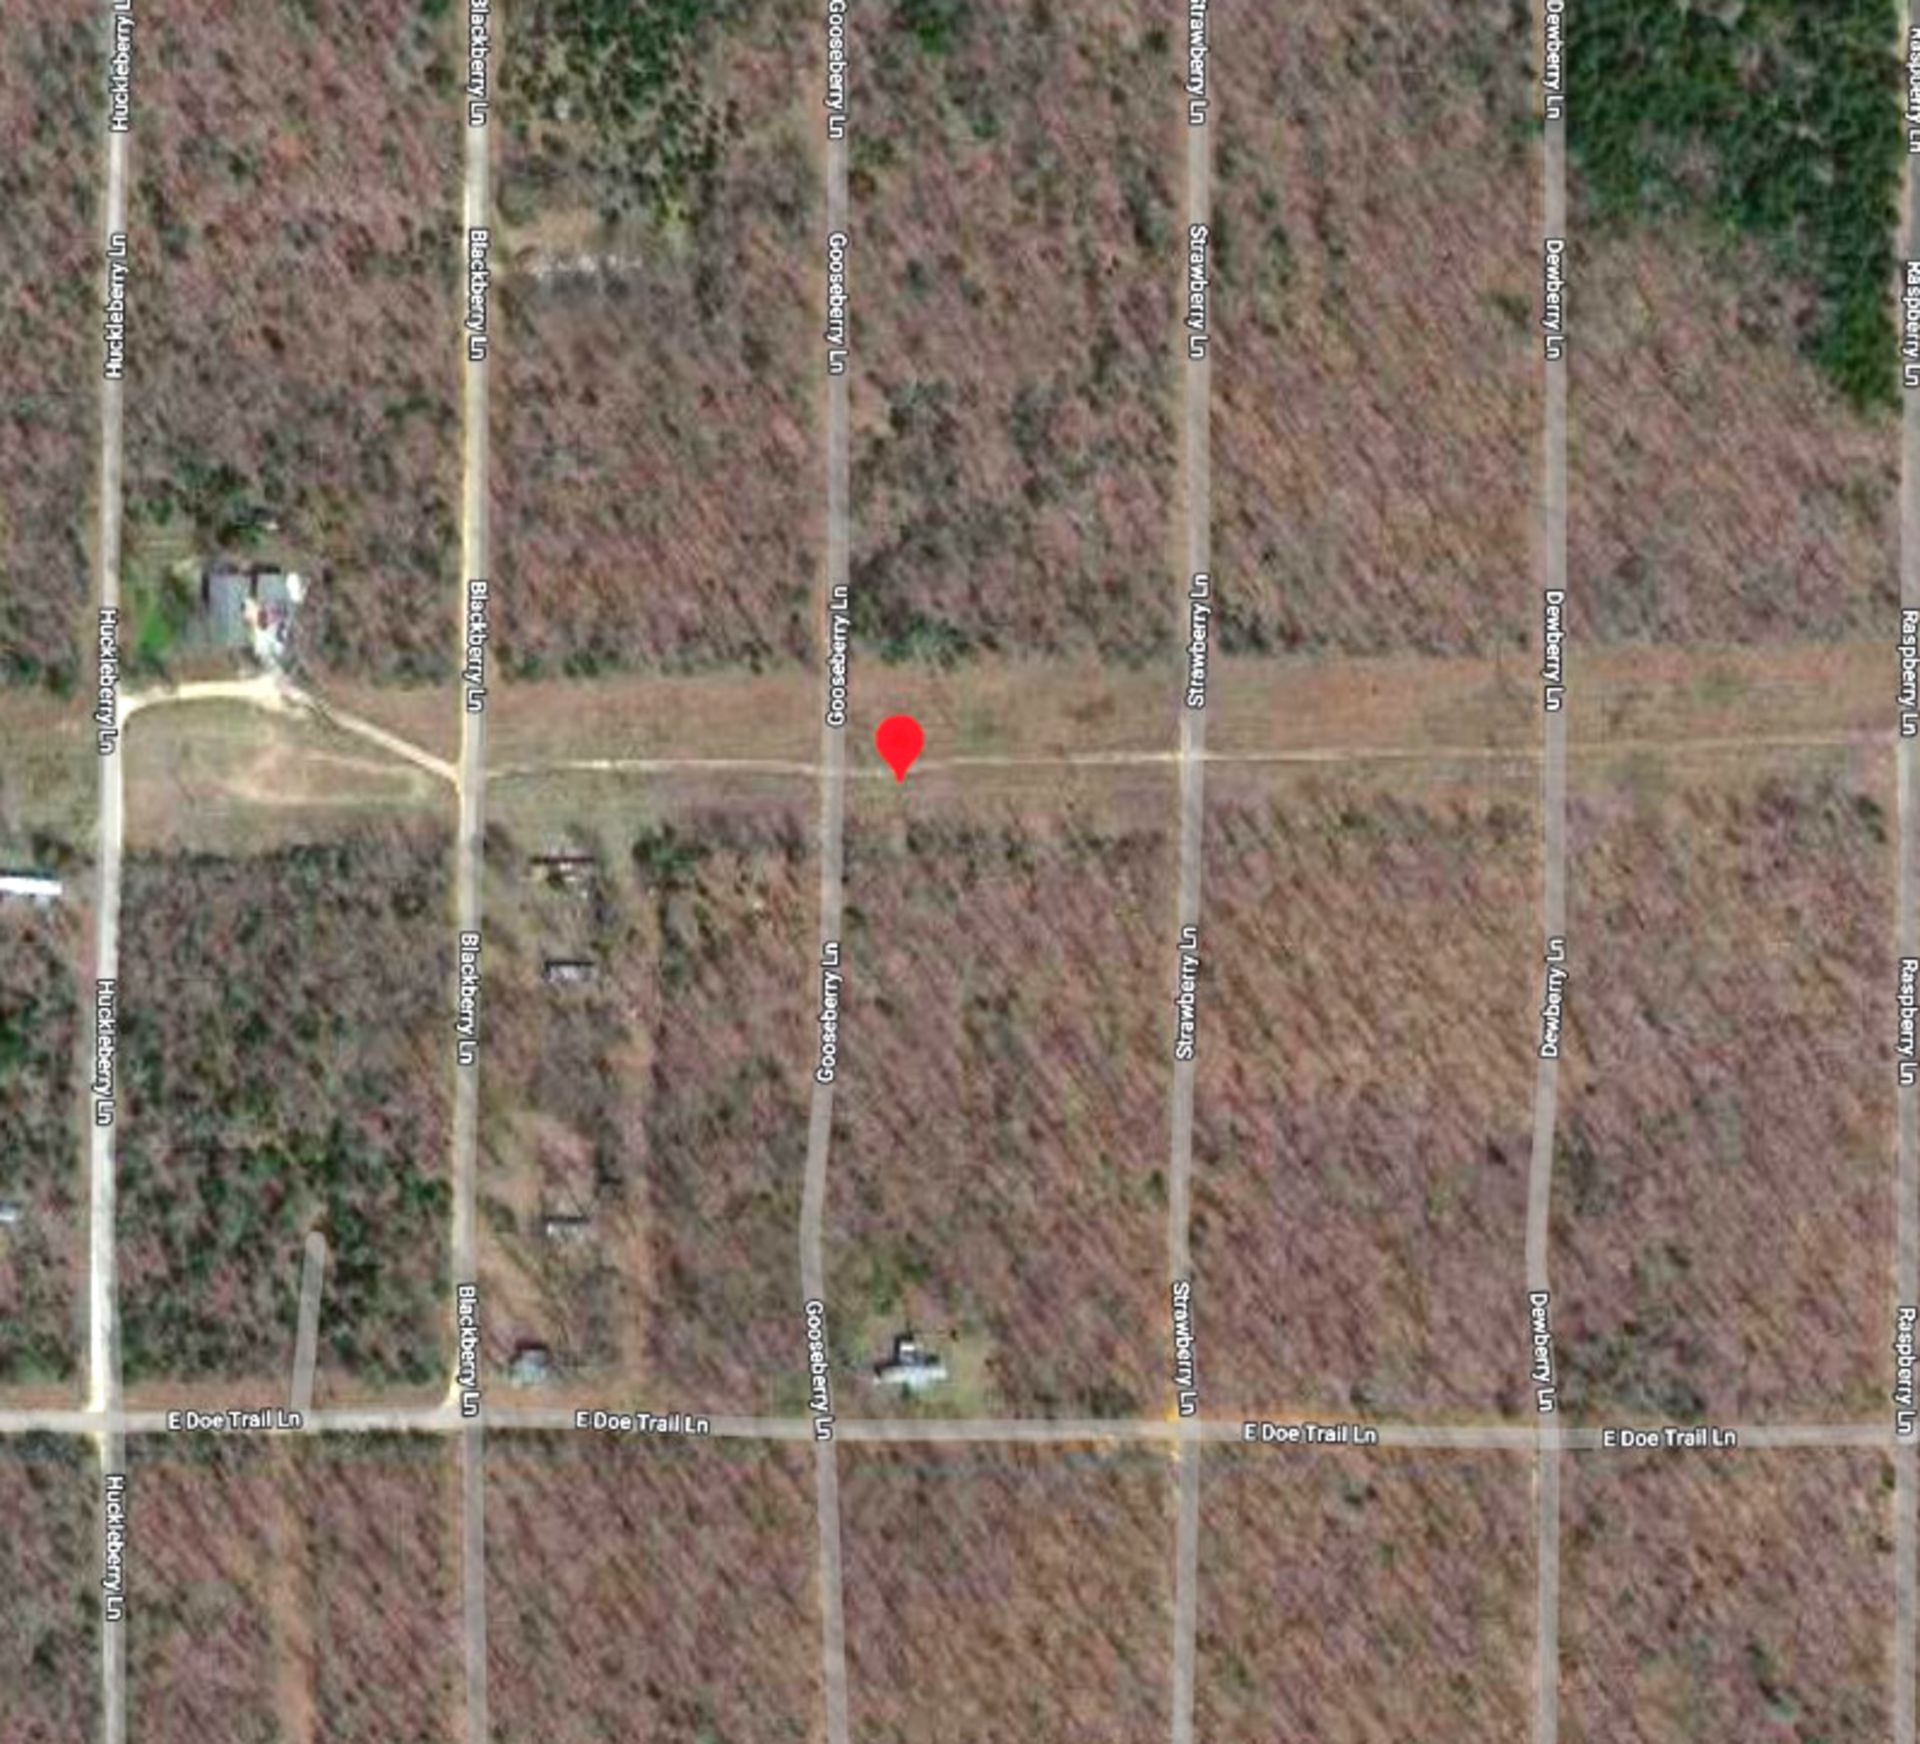 Invest in Yourself & Invest in Land with this Quarter-Acre Lot in Horseshoe Bend, Arkansas! - Image 12 of 15